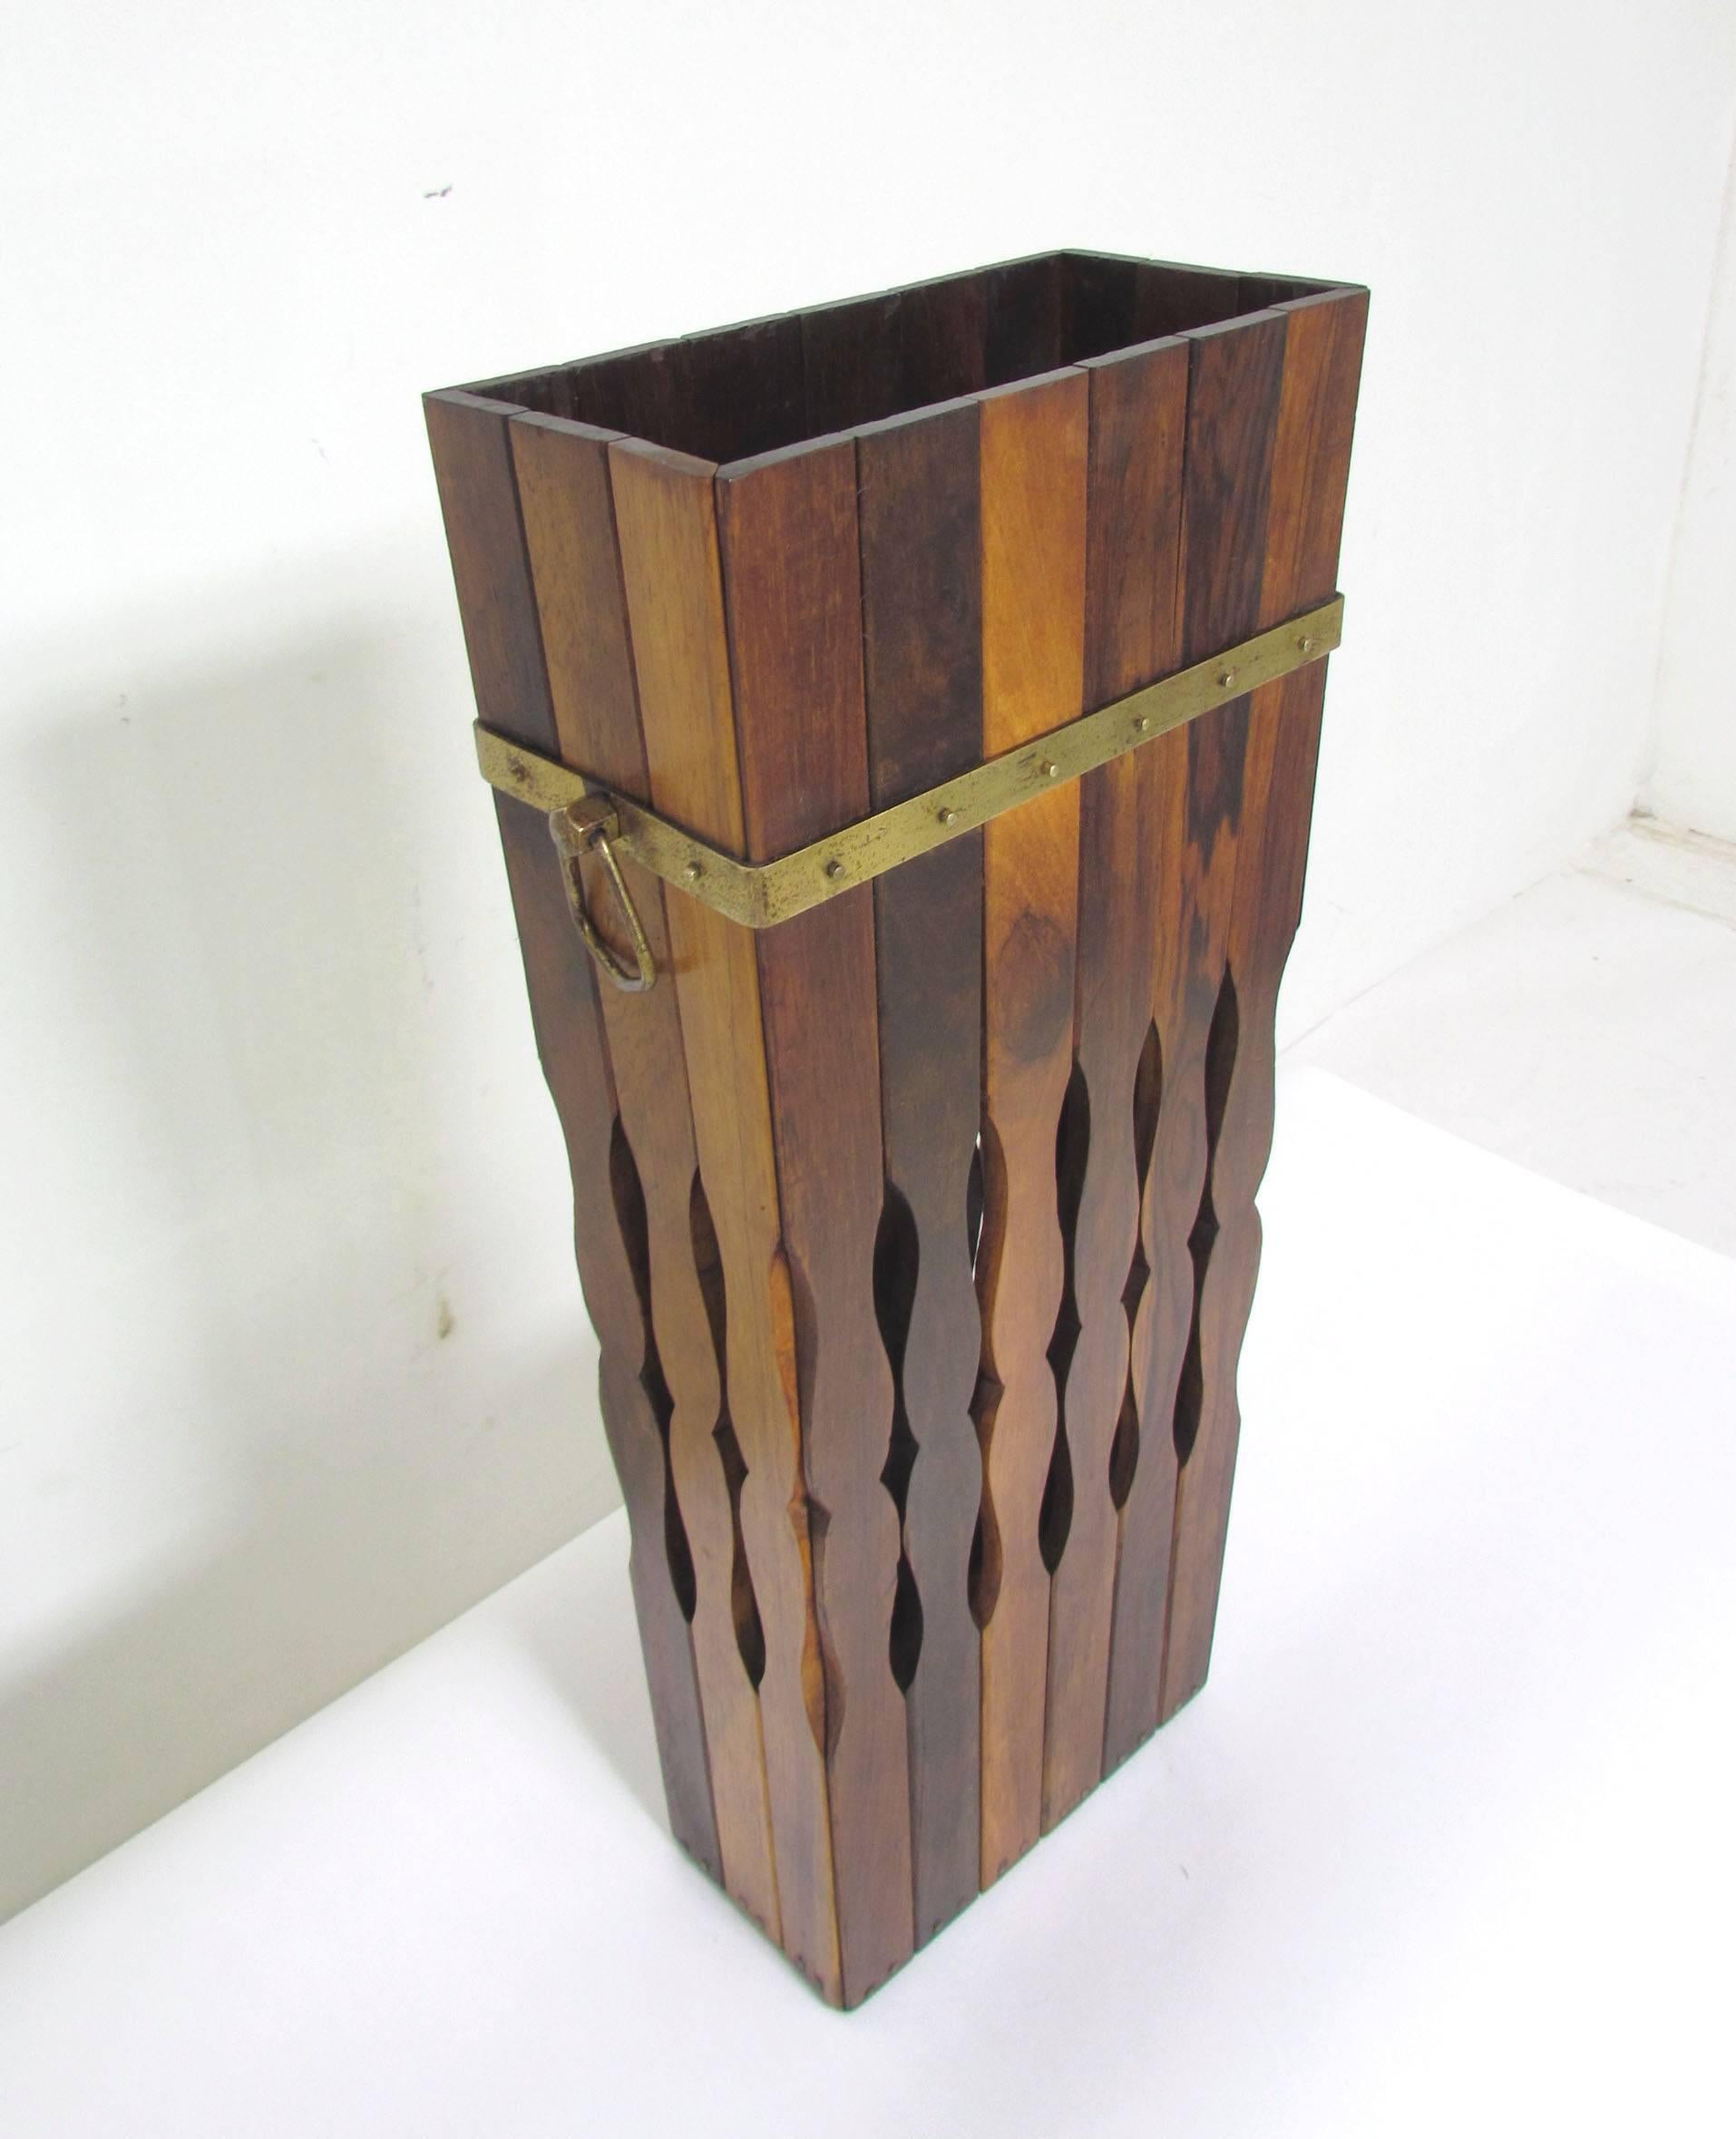 Elegant rosewood umbrella stand with cut-out accents, brass banding and nailhead stud accents, circa early 1970s, made in Brazil by Arte e Decoracoes, Fantozzi Ltd.